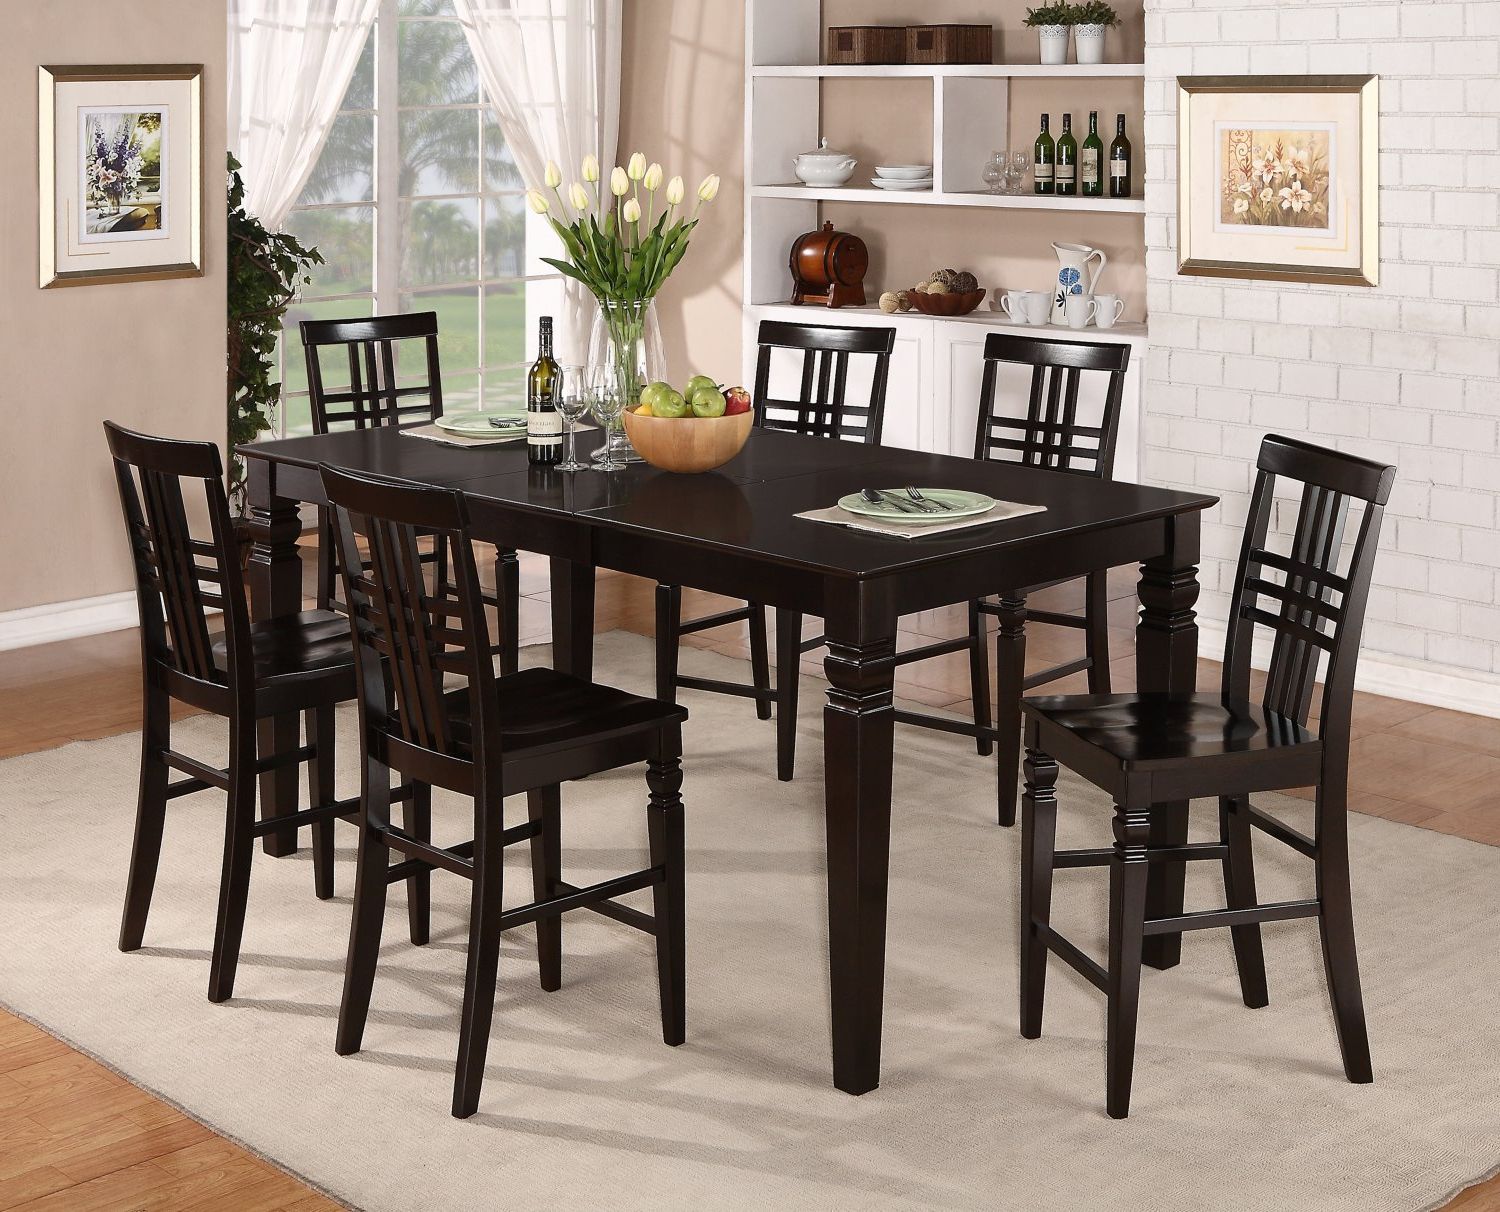 2020 Pennside Counter Height Dining Tables Inside 7 Pc Dinette Counter Height Table With 6 Wood Seat Chairs (View 8 of 20)